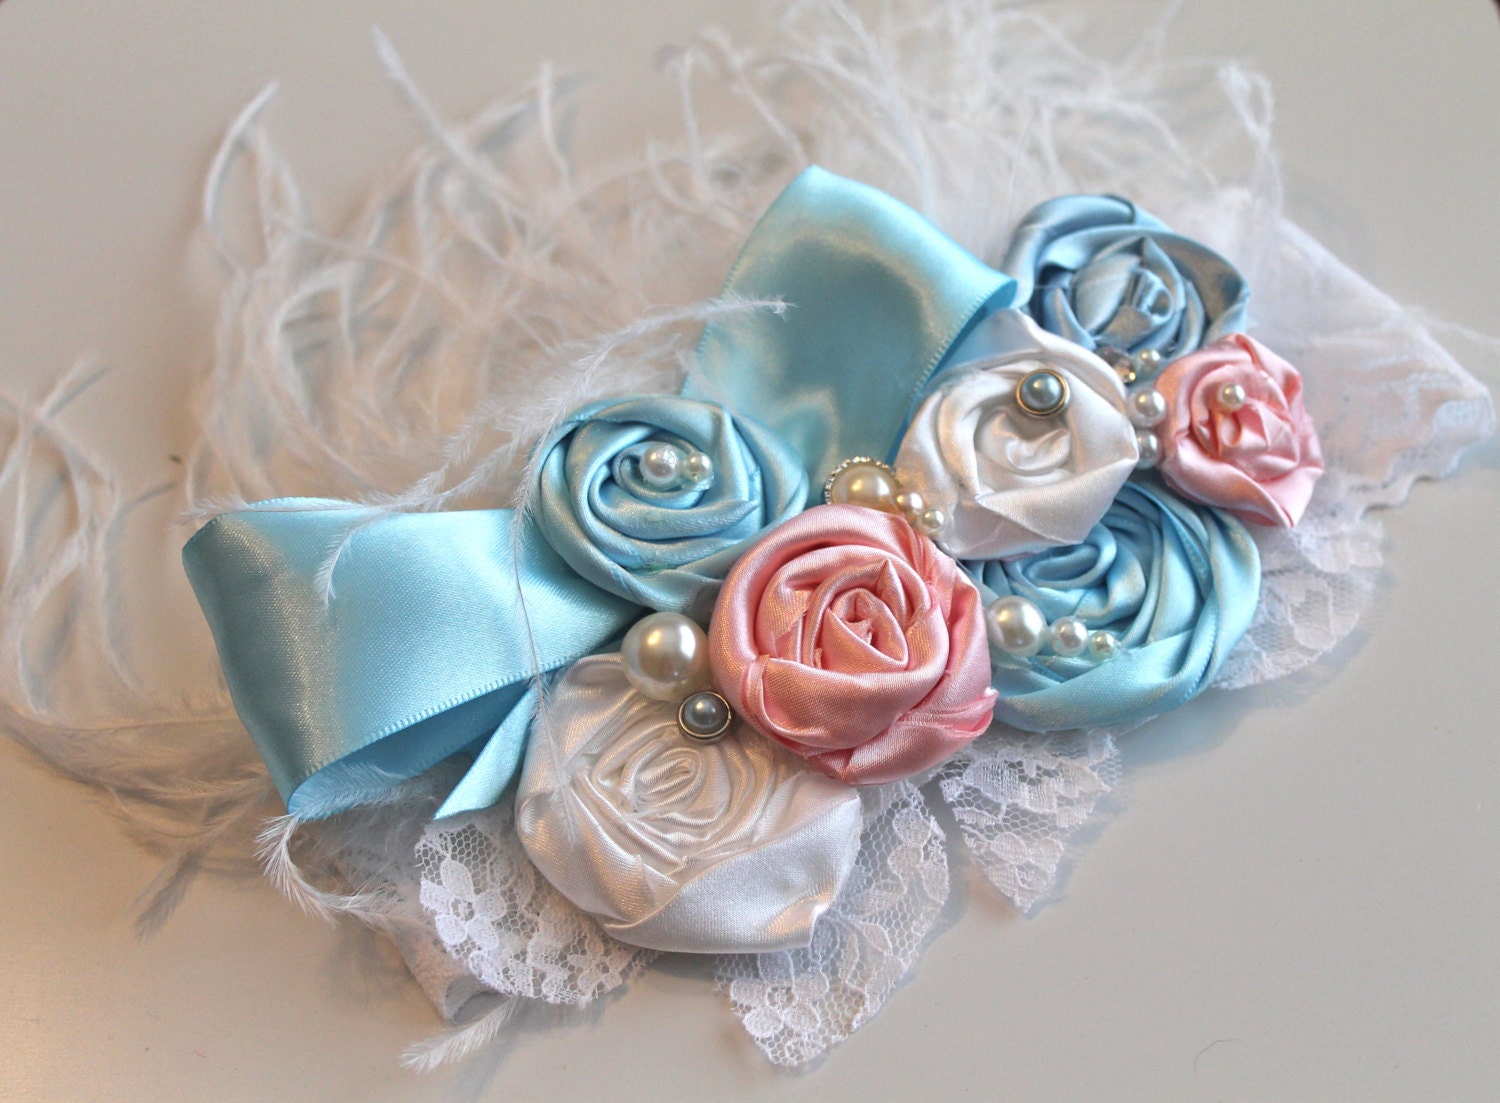 An artisan lover: Over the top headband, on light blue and pink satin ...